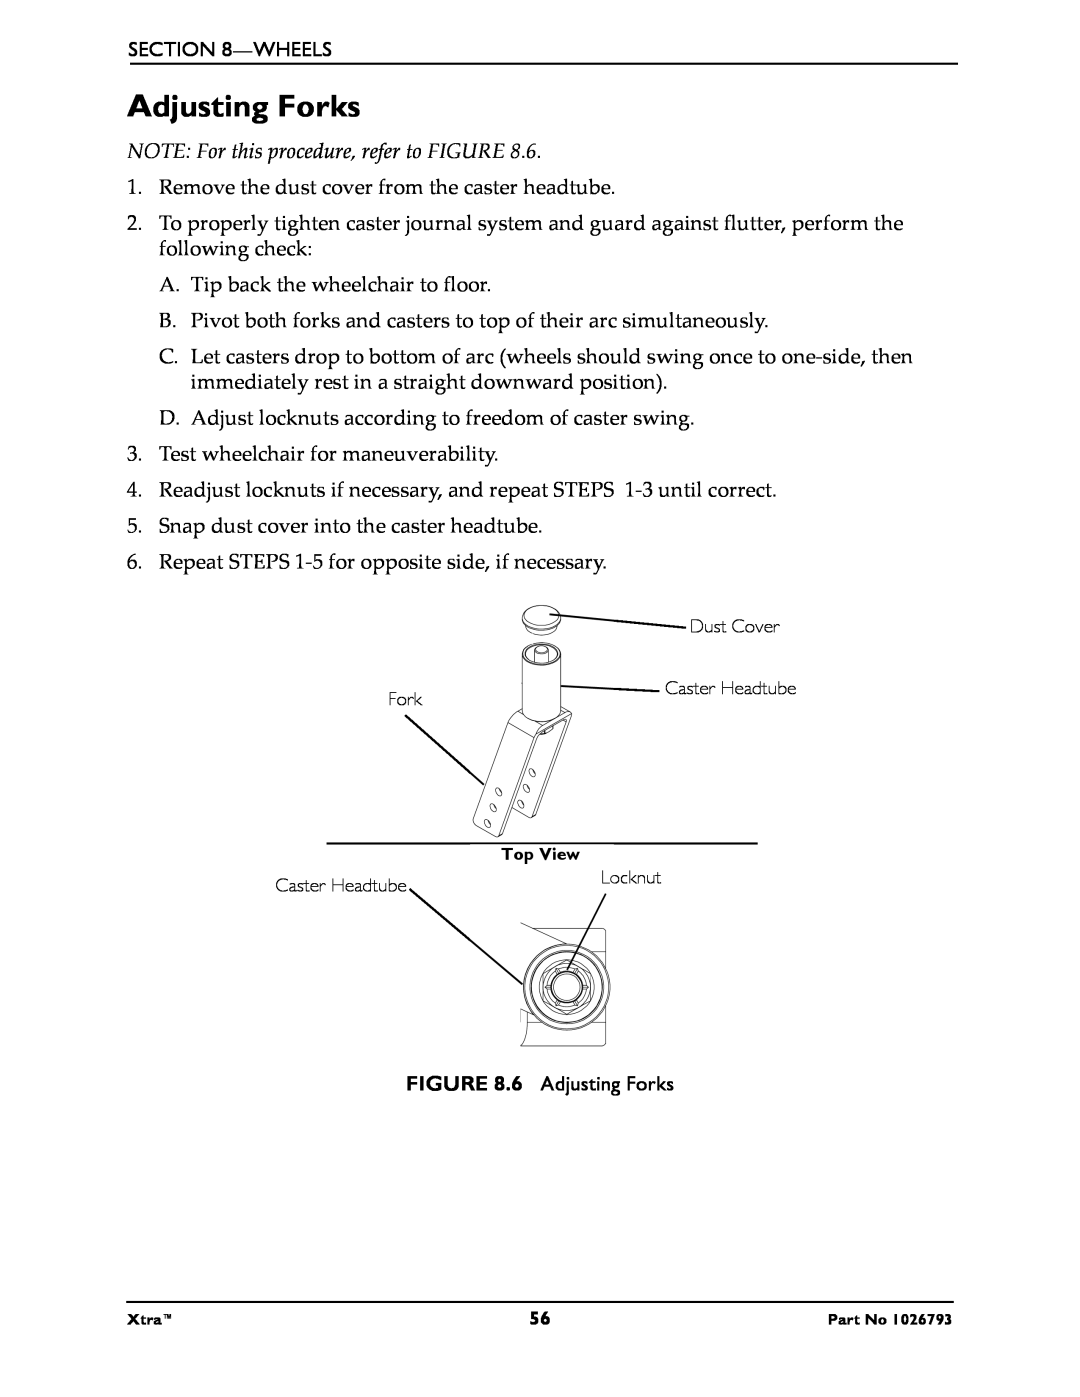 Invacare 1026793 manual Adjusting Forks, NOTE For this procedure, refer to FIGURE 